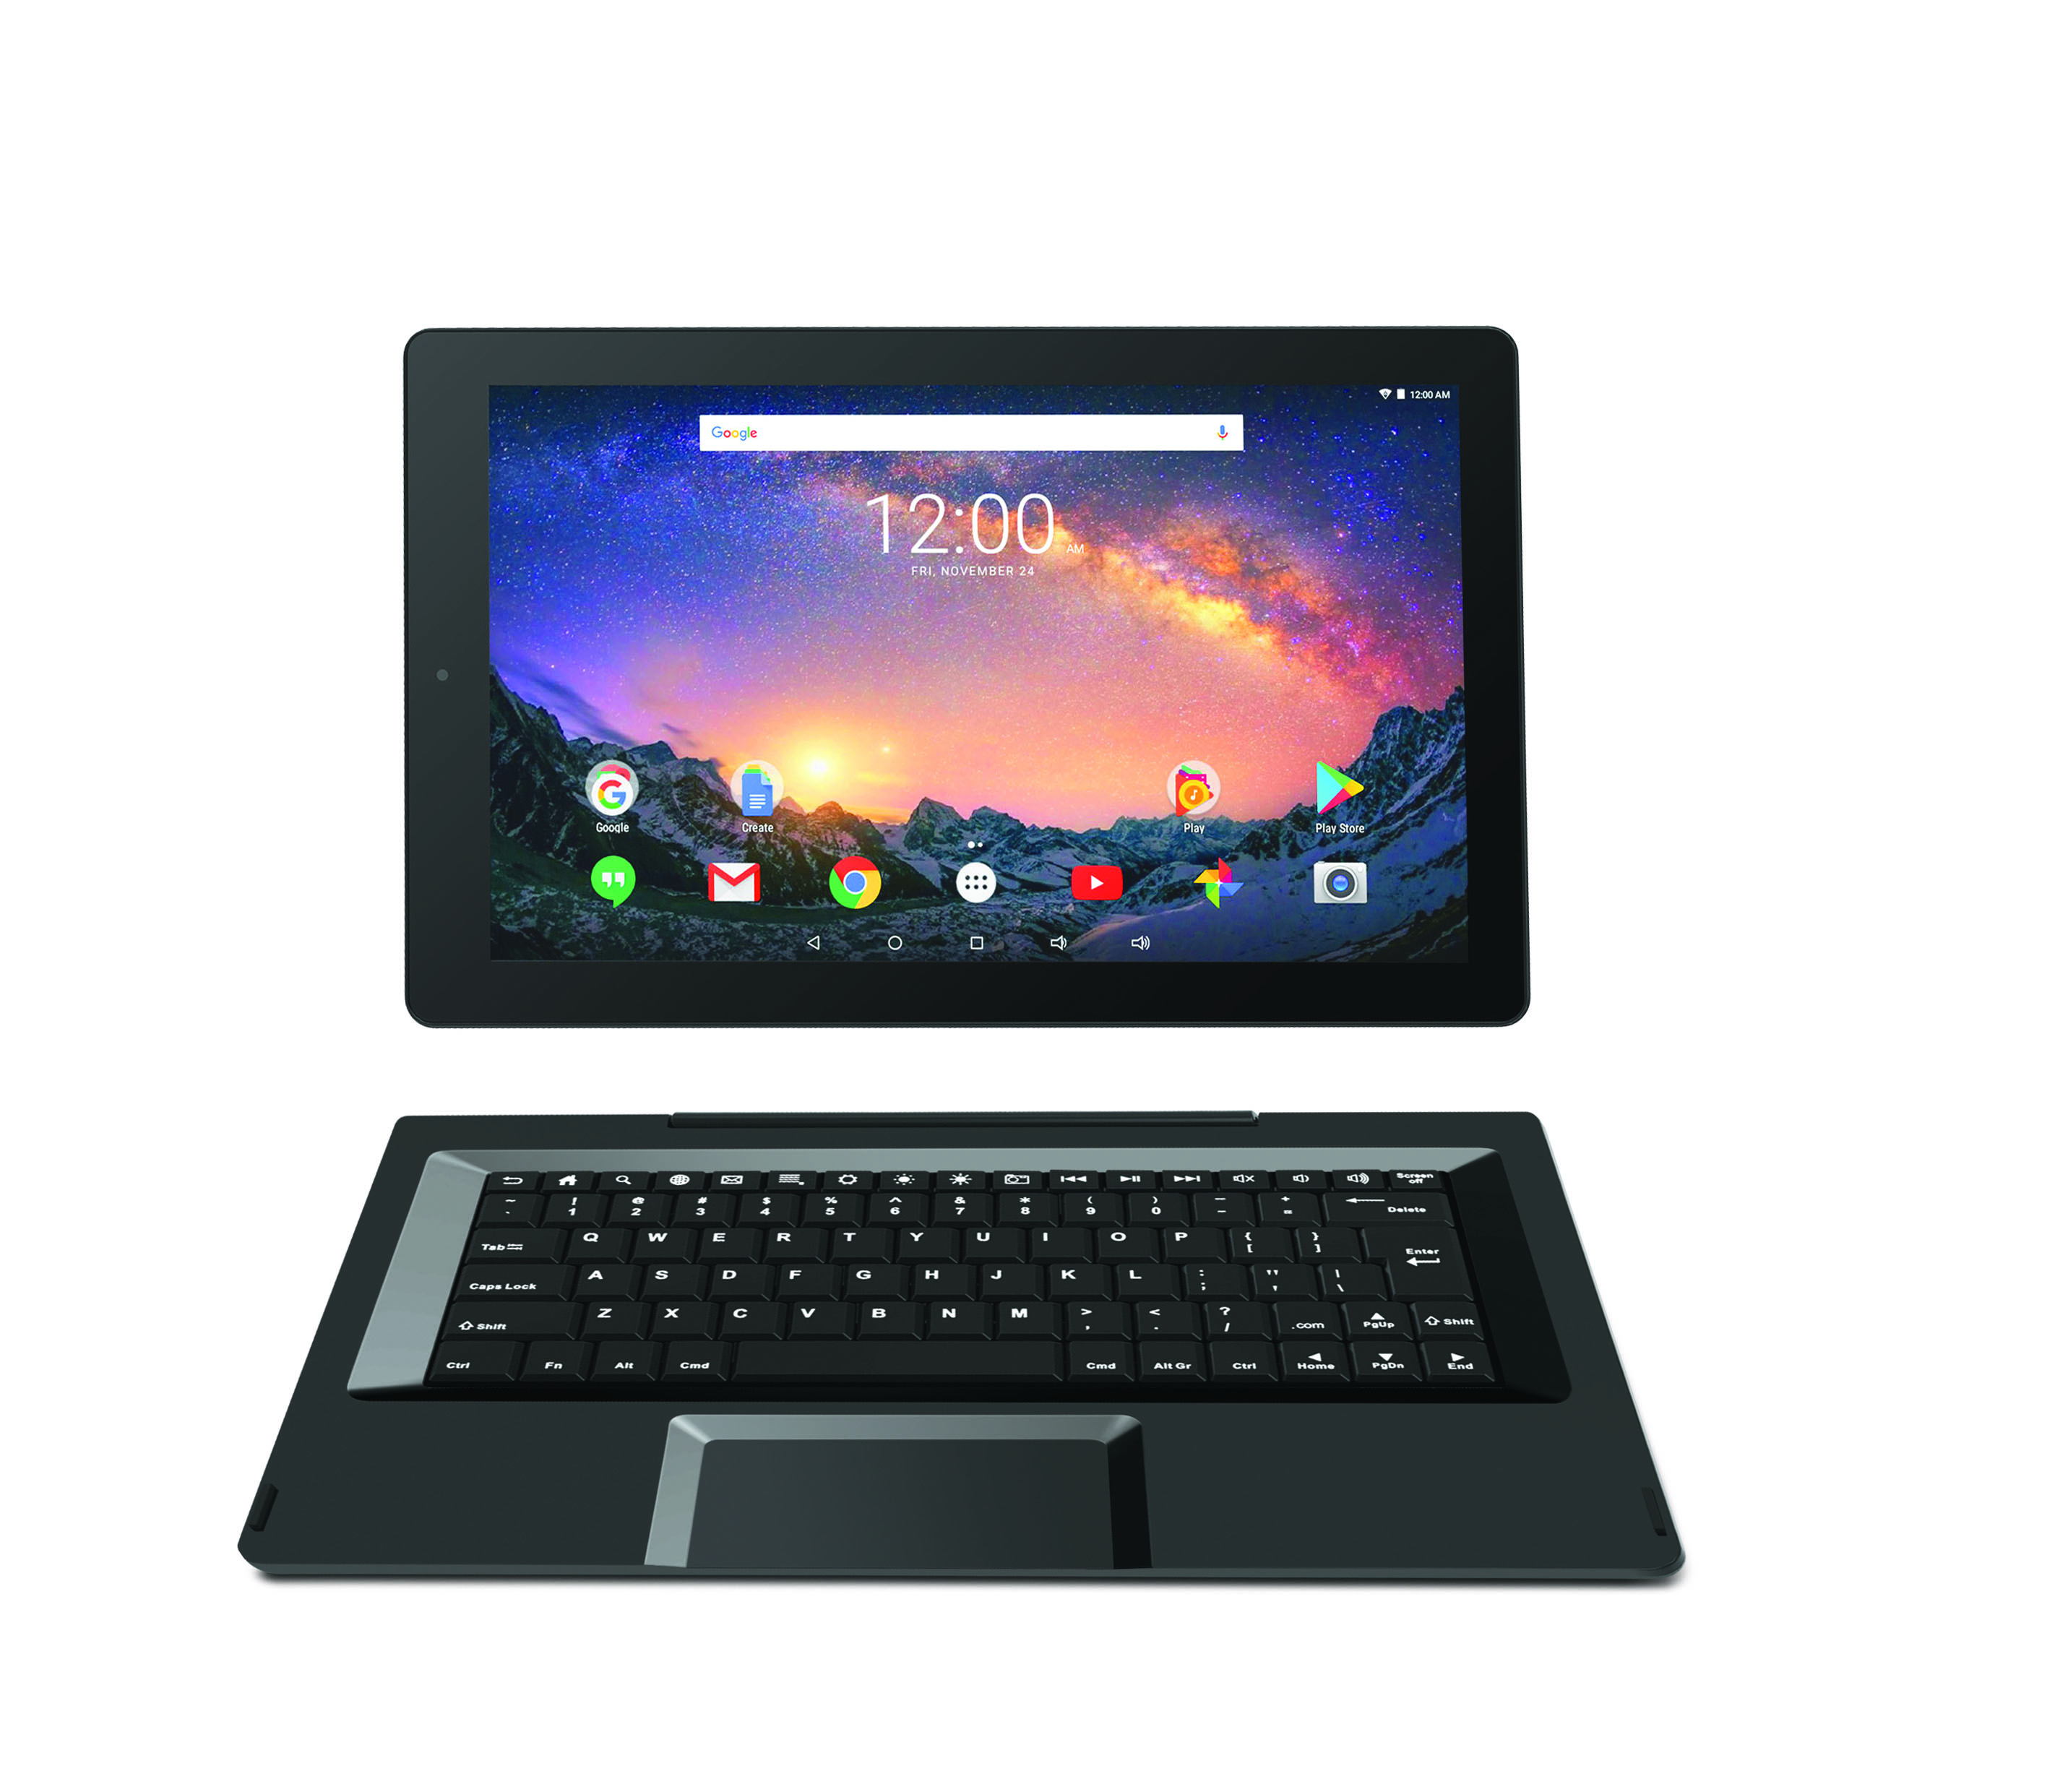 RCA Galileo Pro 11.5" 32GB 2-in-1 Tablet with Keyboard Case Android OS, Charcoal (Google Classroom Ready) - image 2 of 5